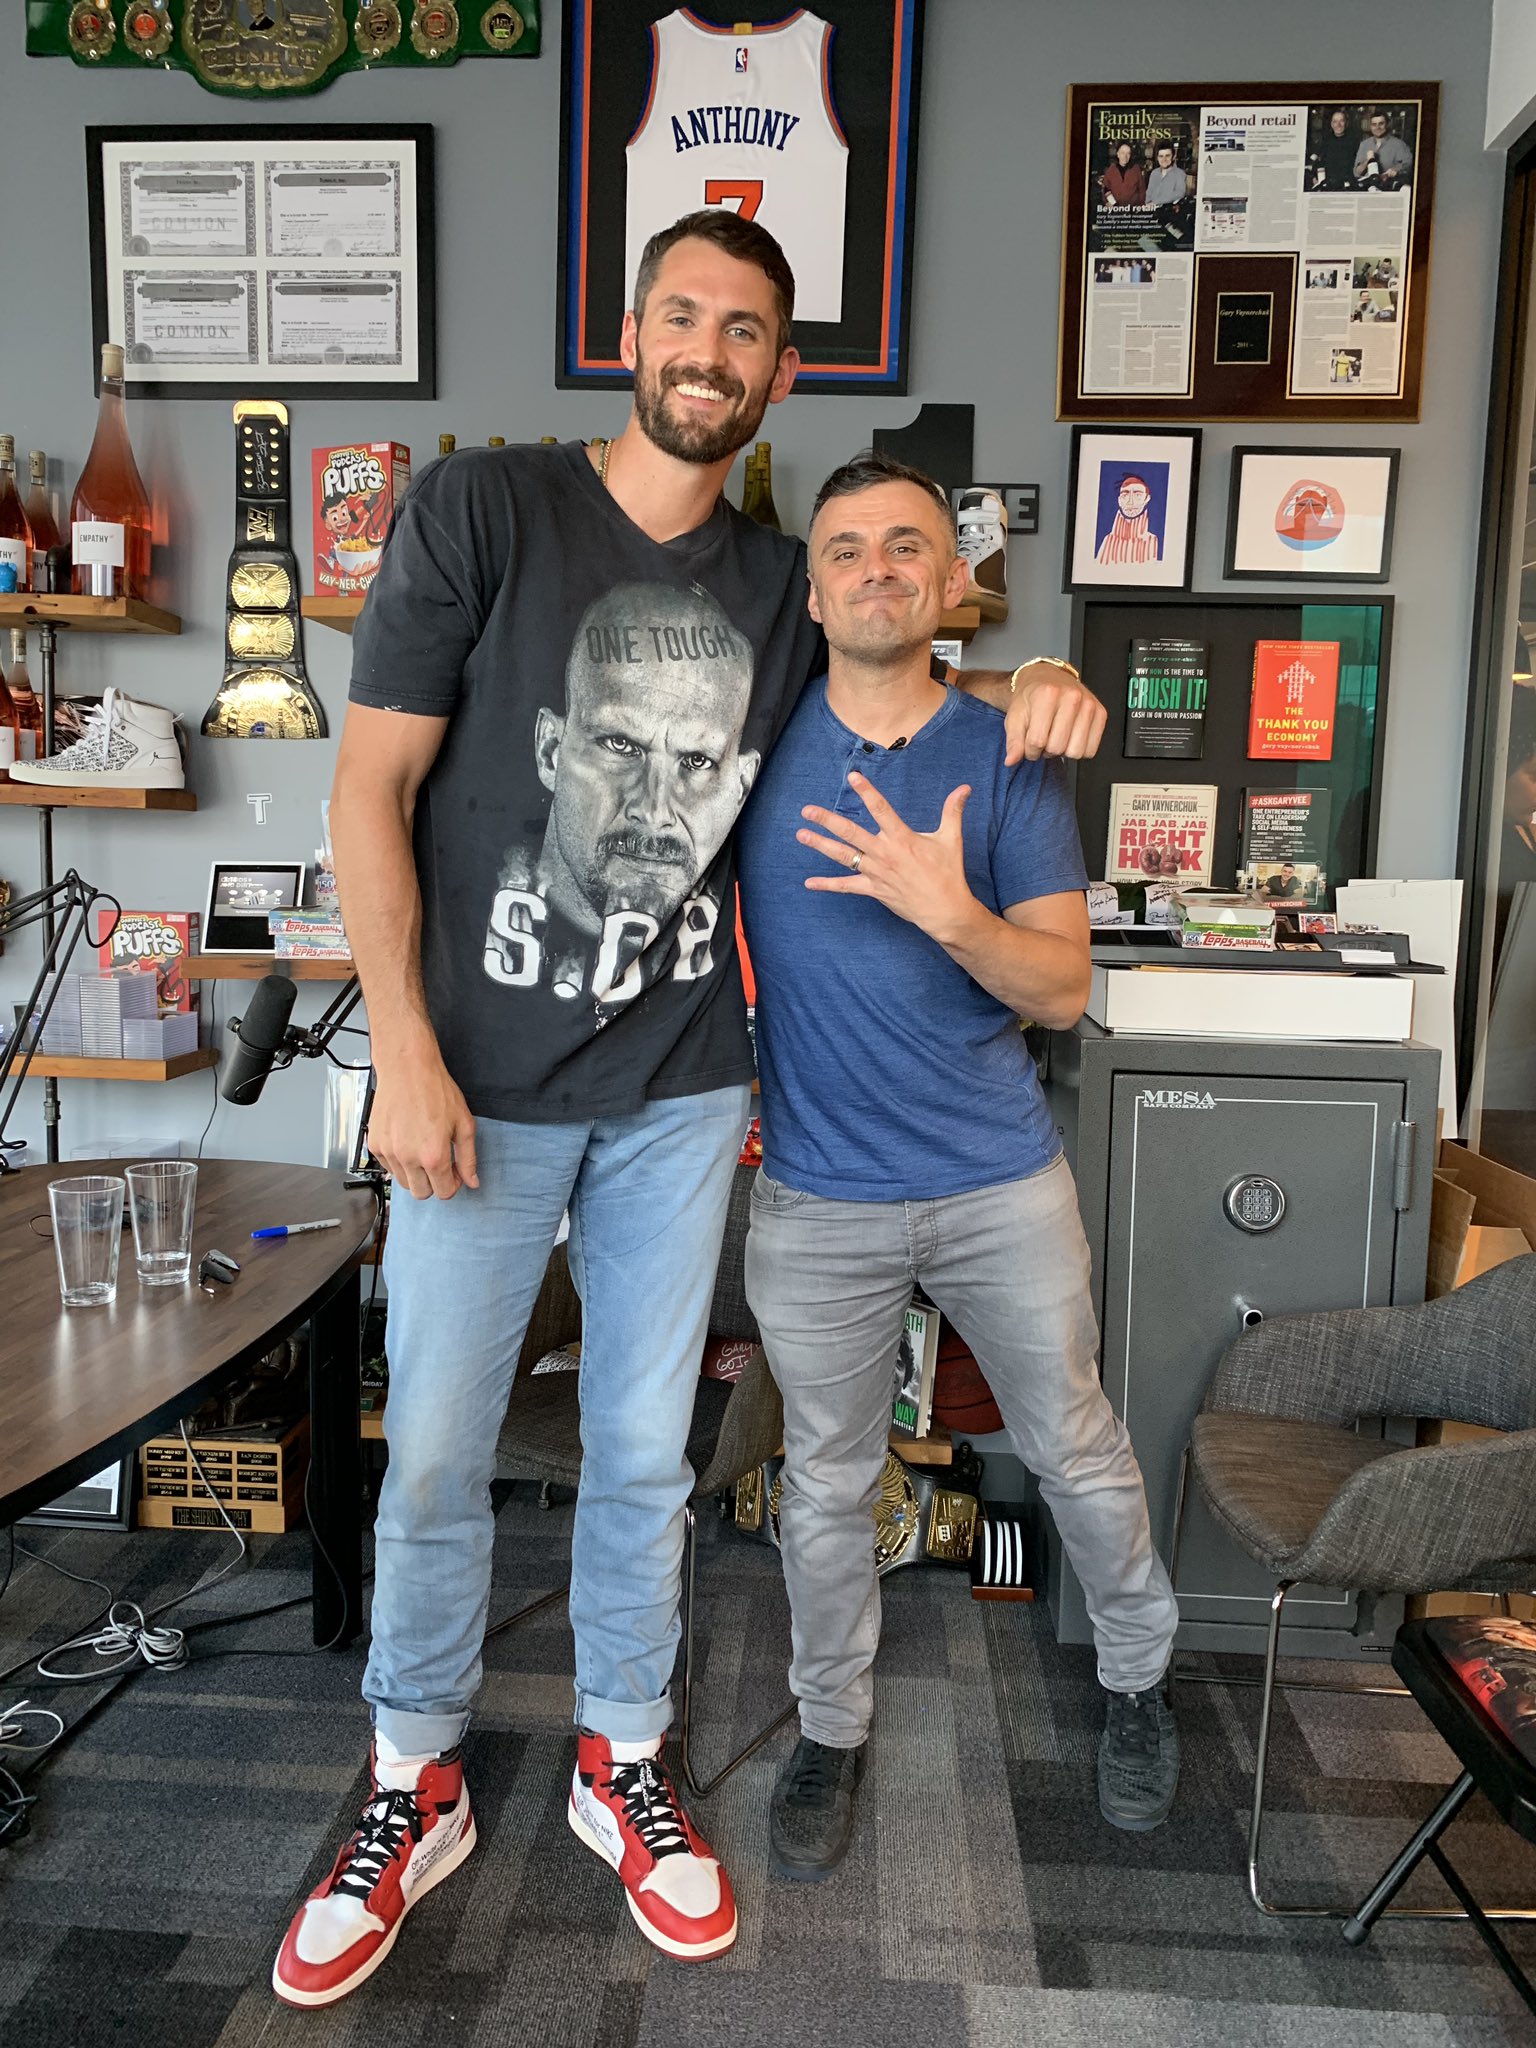 How Tall is Gary Vee